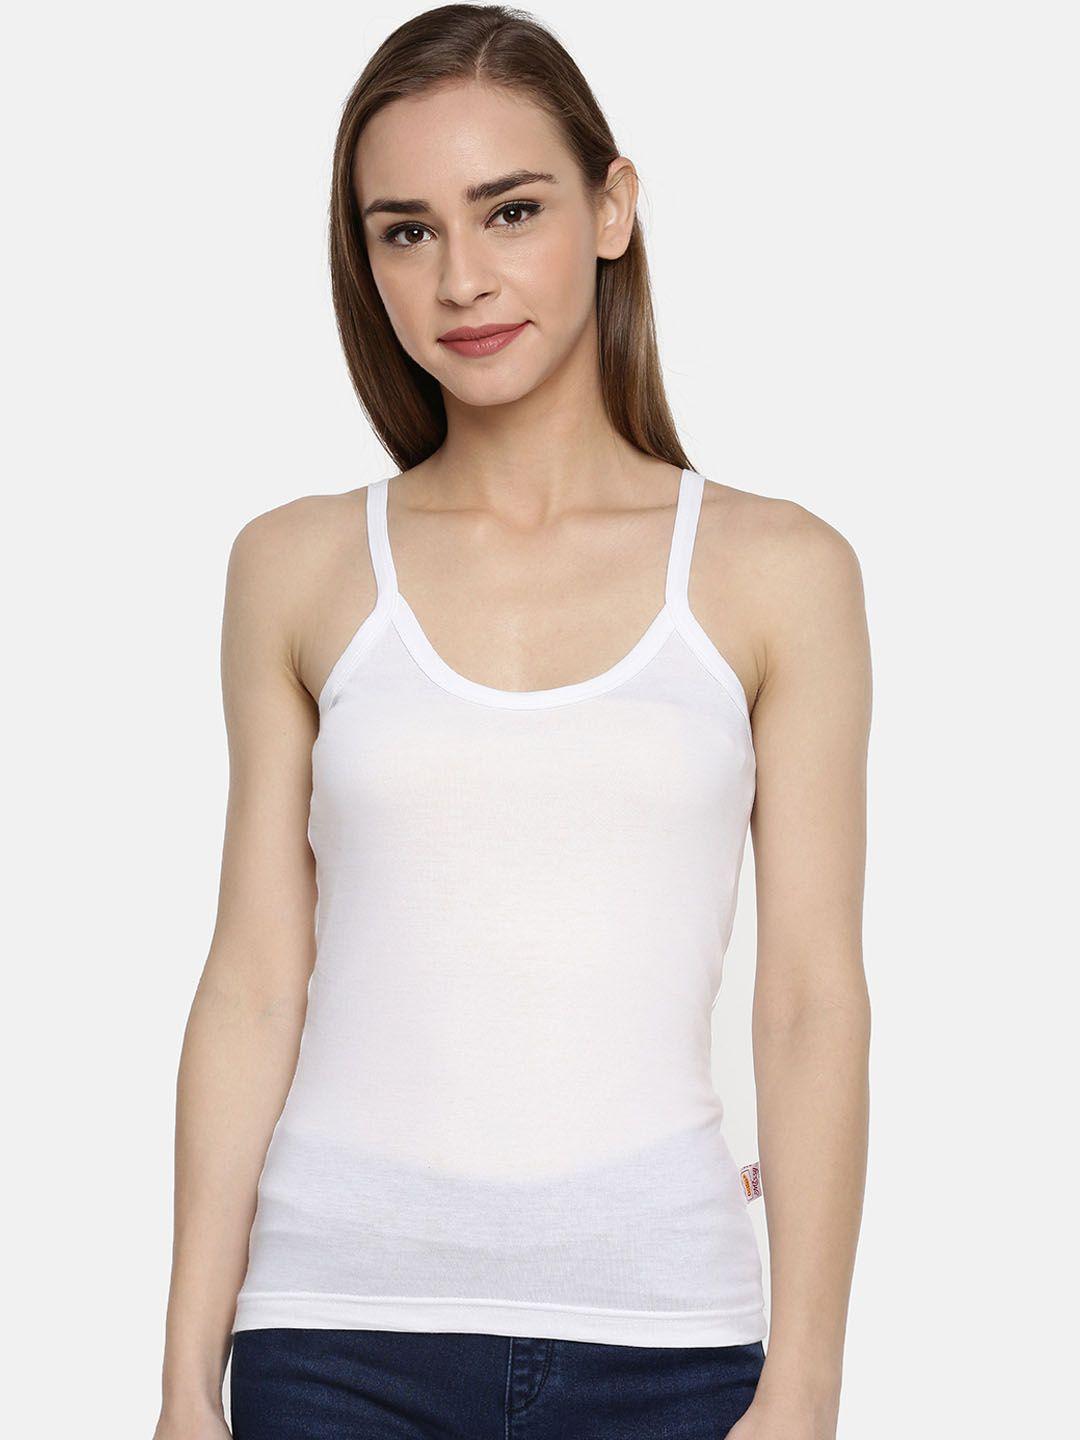 dollar-missy-pack-of-5-women-combed-cotton-camisole